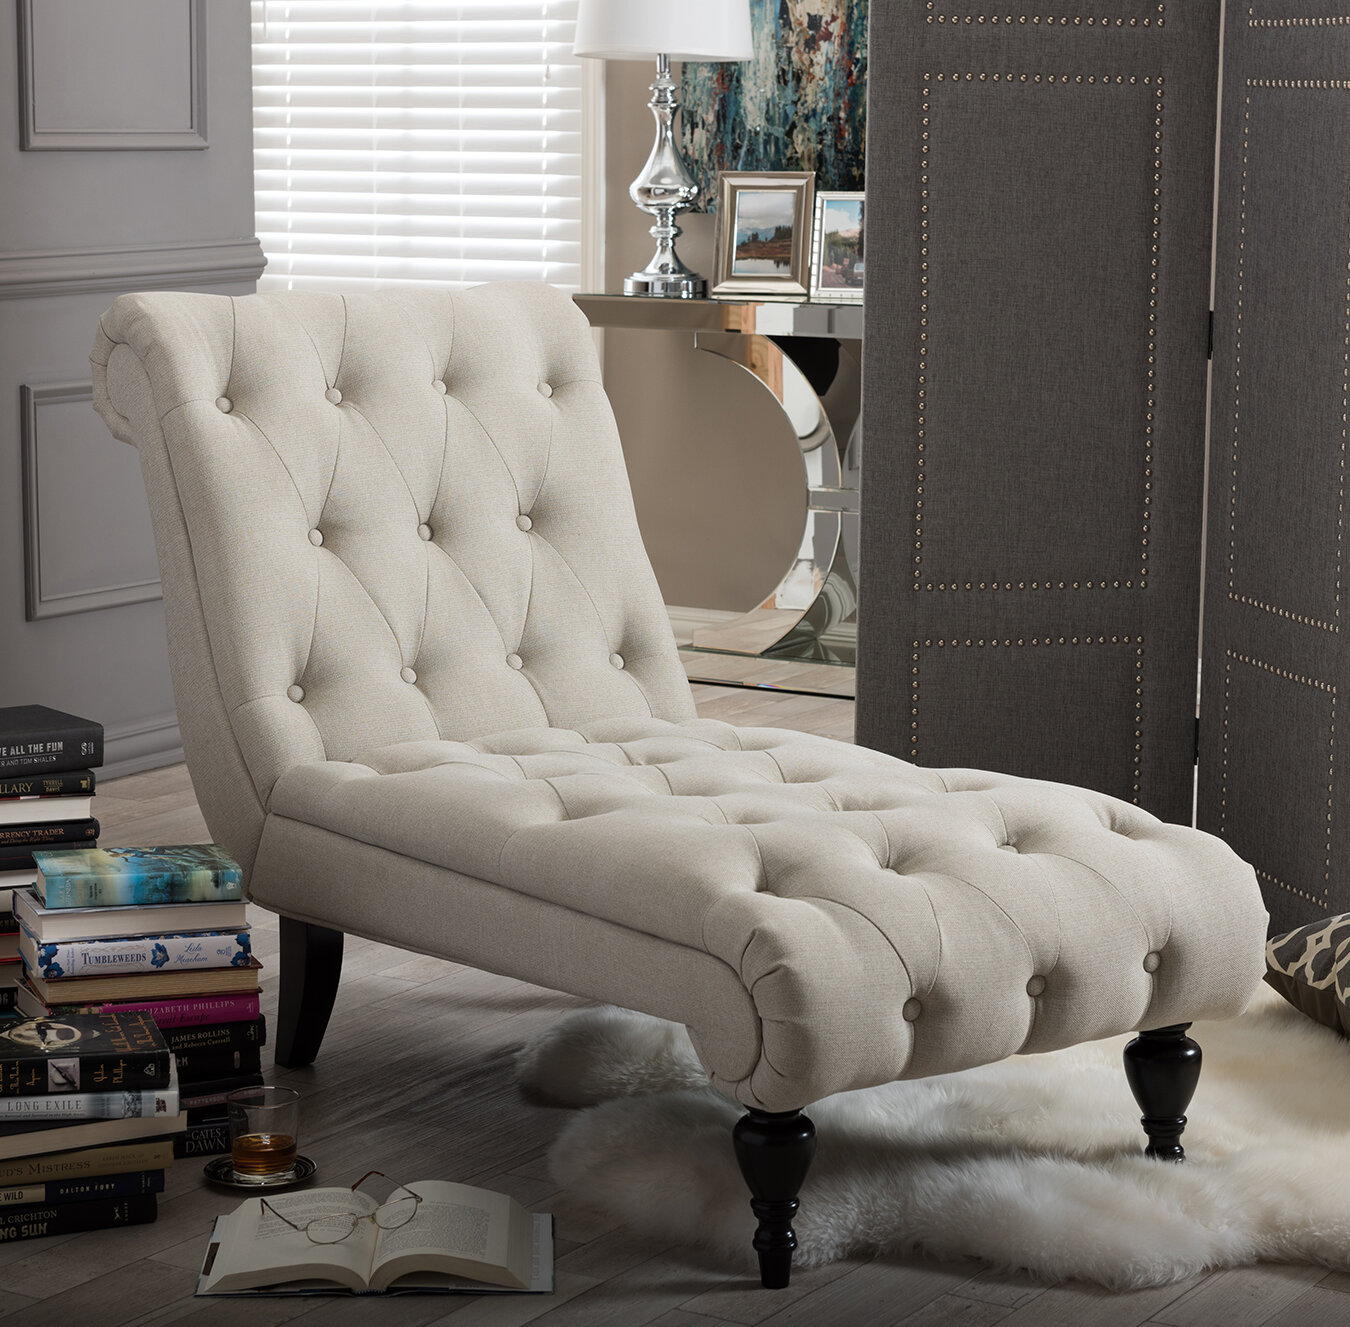 Colegrove Upholstered Chaise Lounge